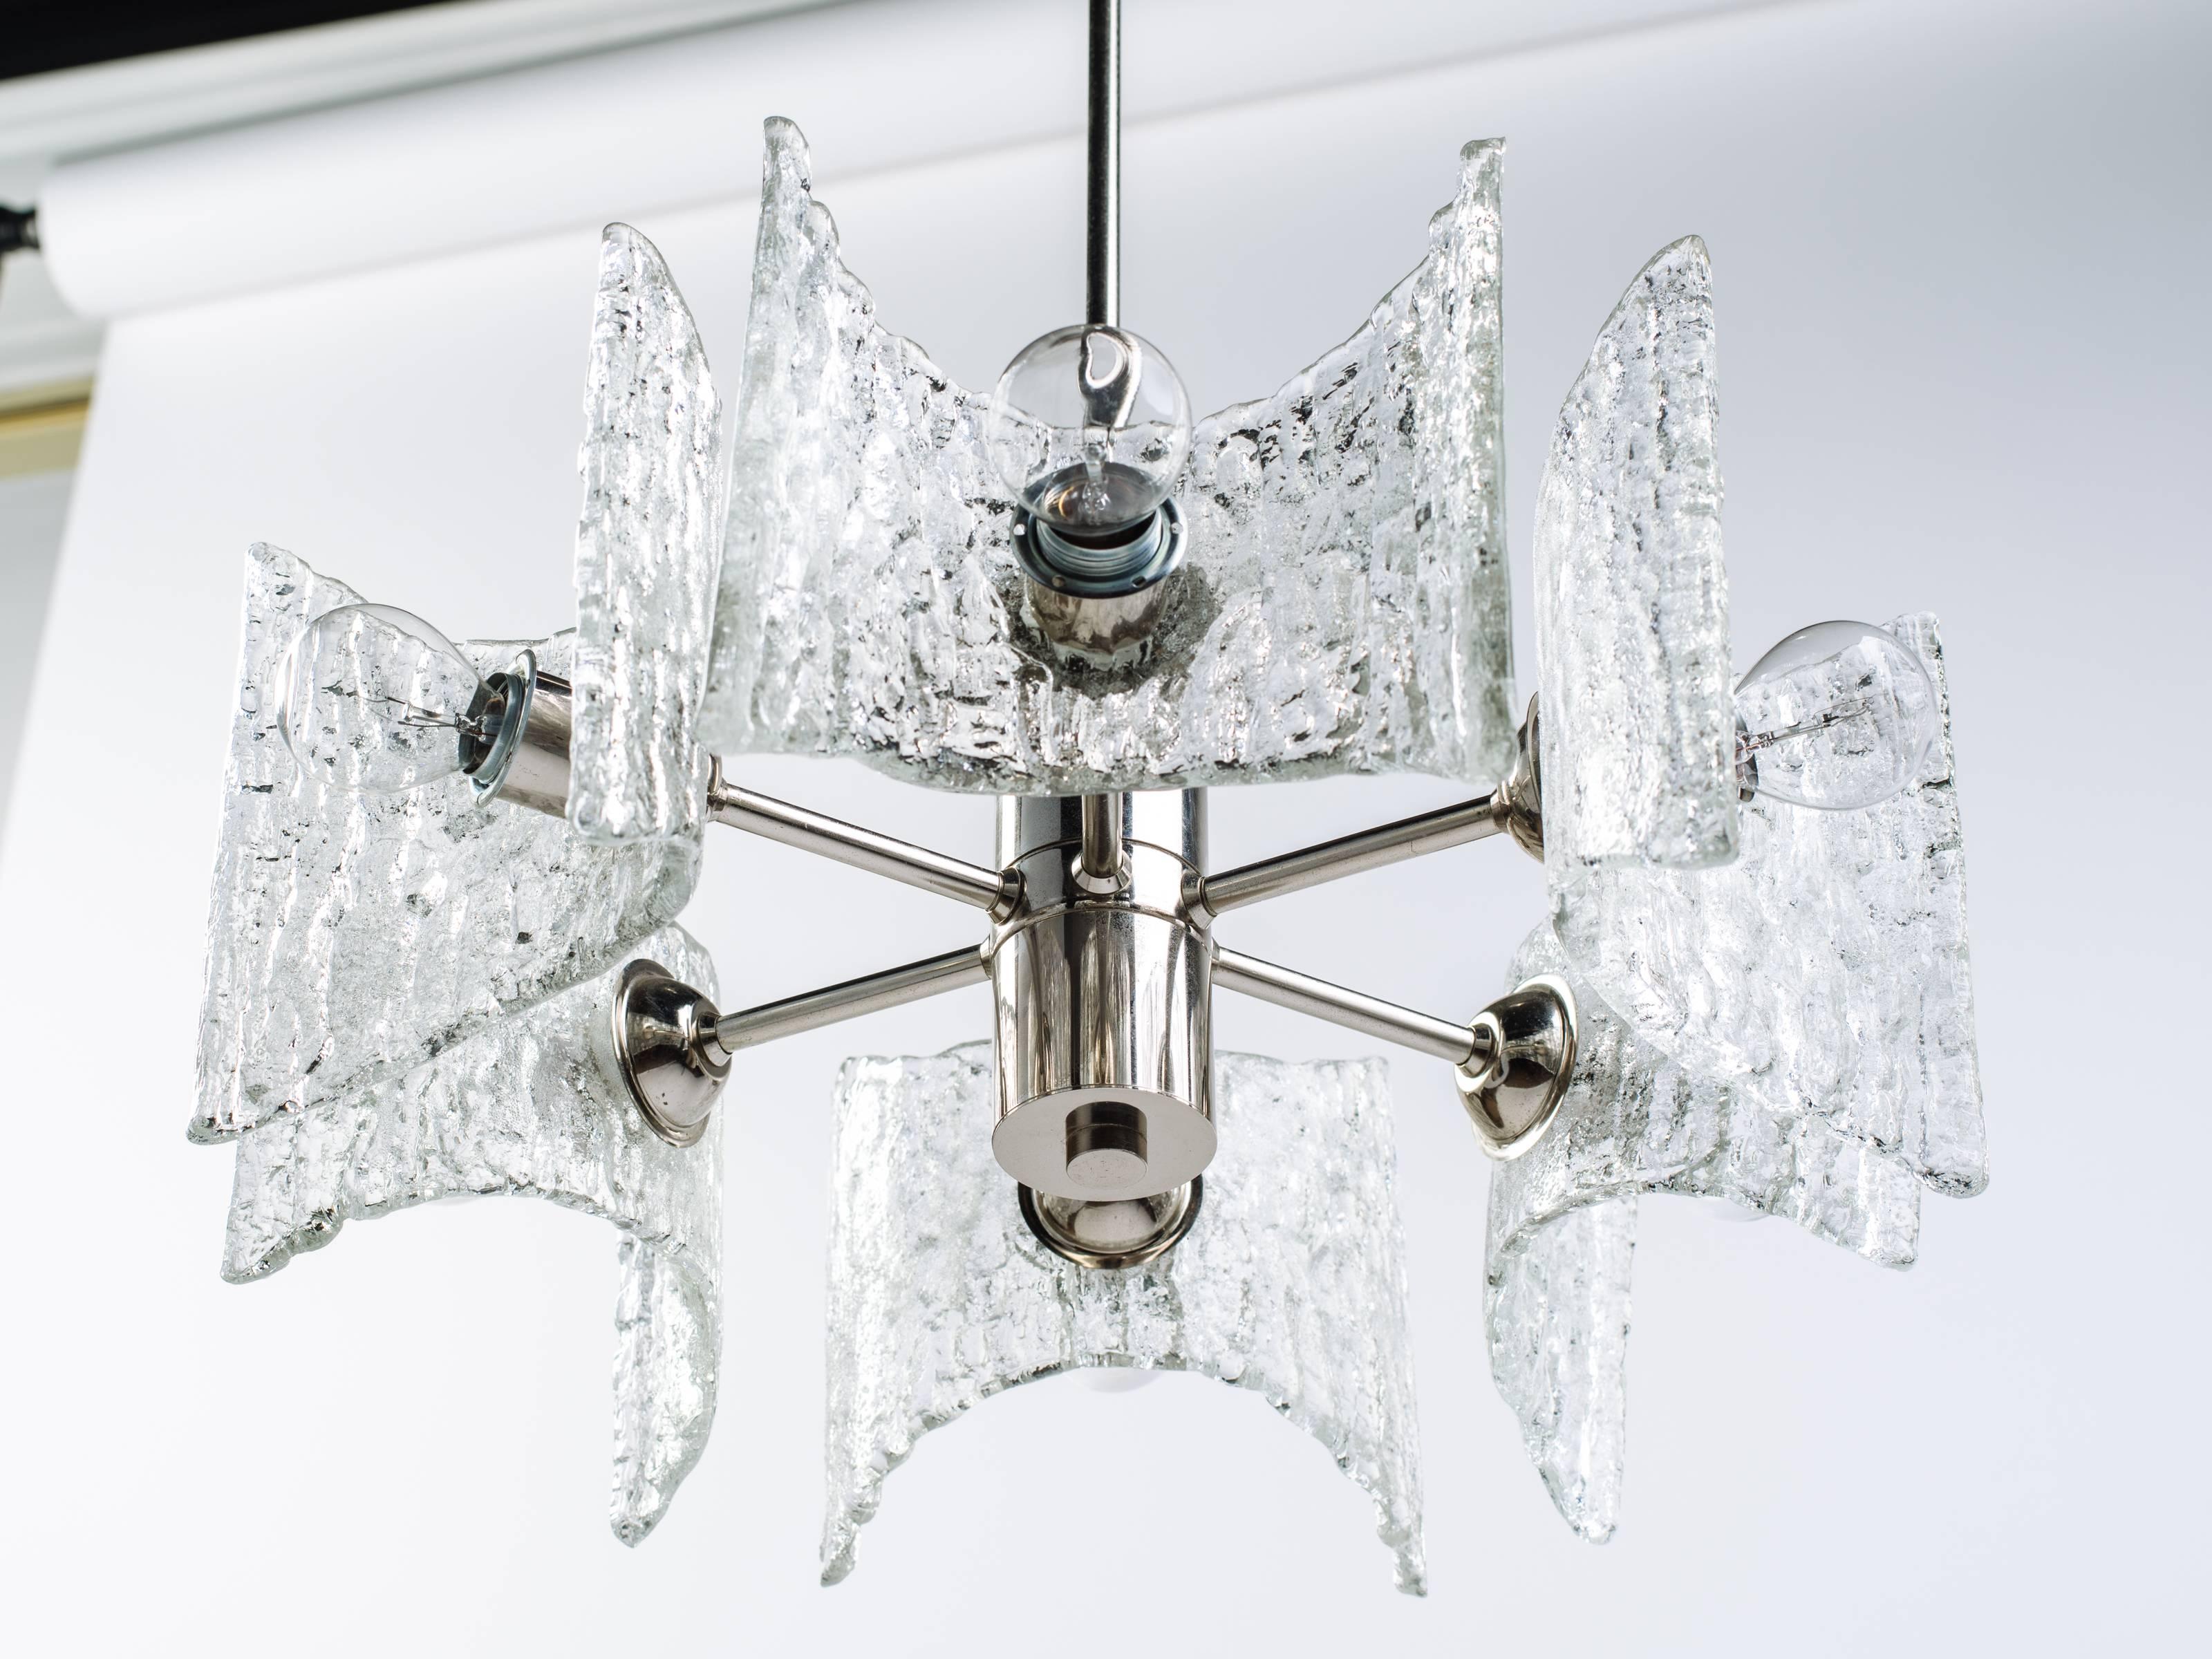 Hand-Crafted Kalmar Star Shaped Chandelier with Textured Glass, Germany, circa 1960's